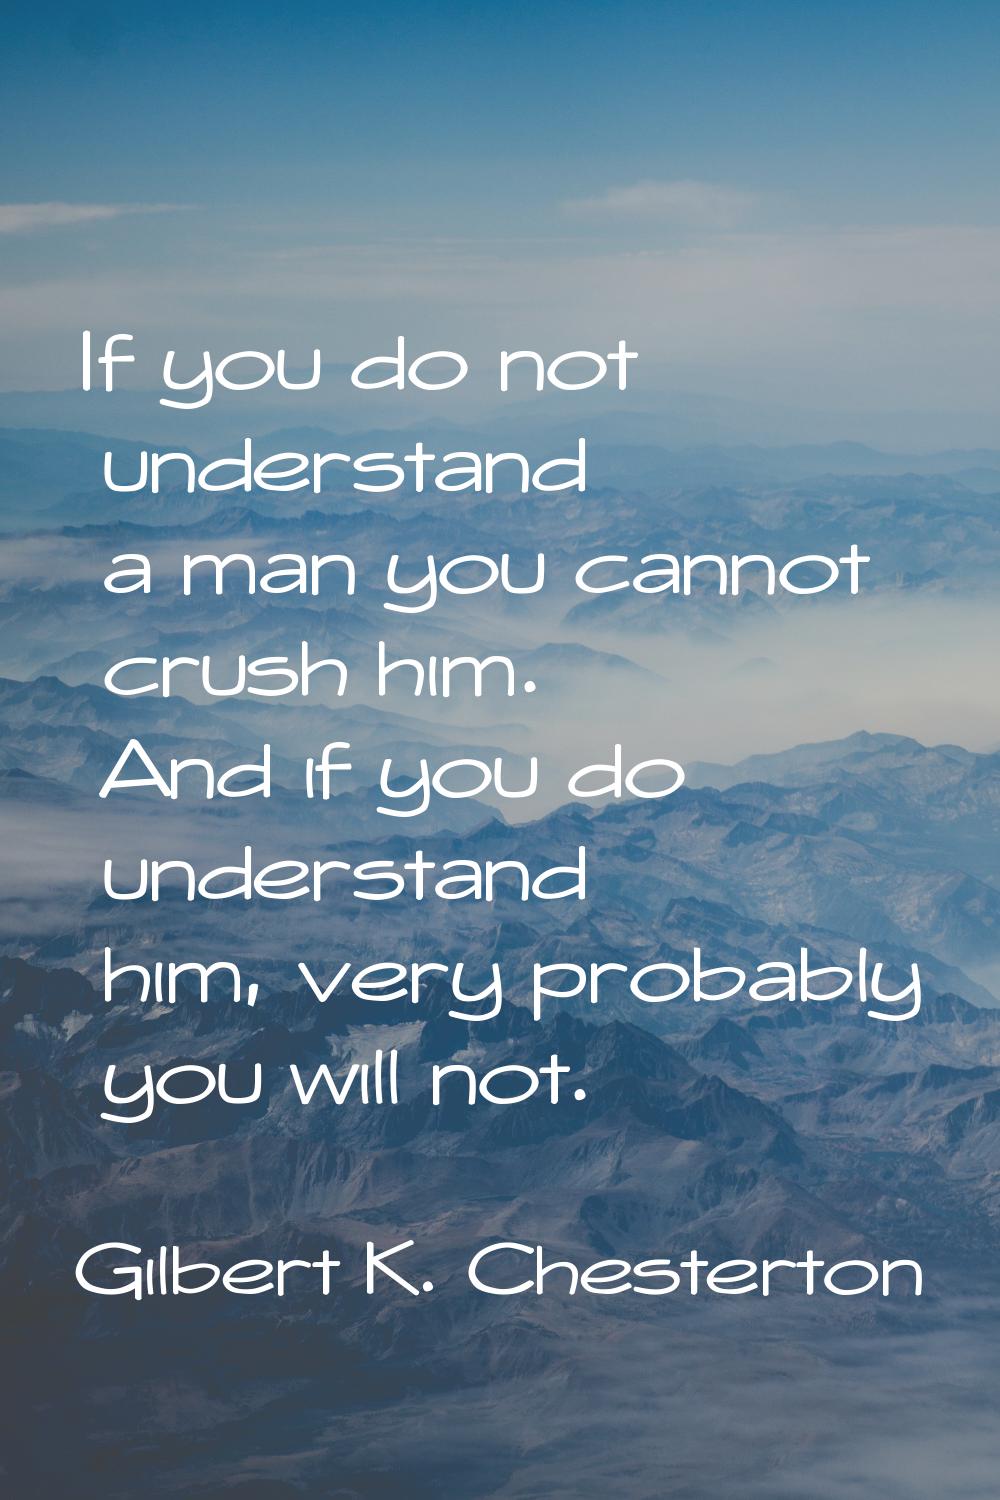 If you do not understand a man you cannot crush him. And if you do understand him, very probably yo